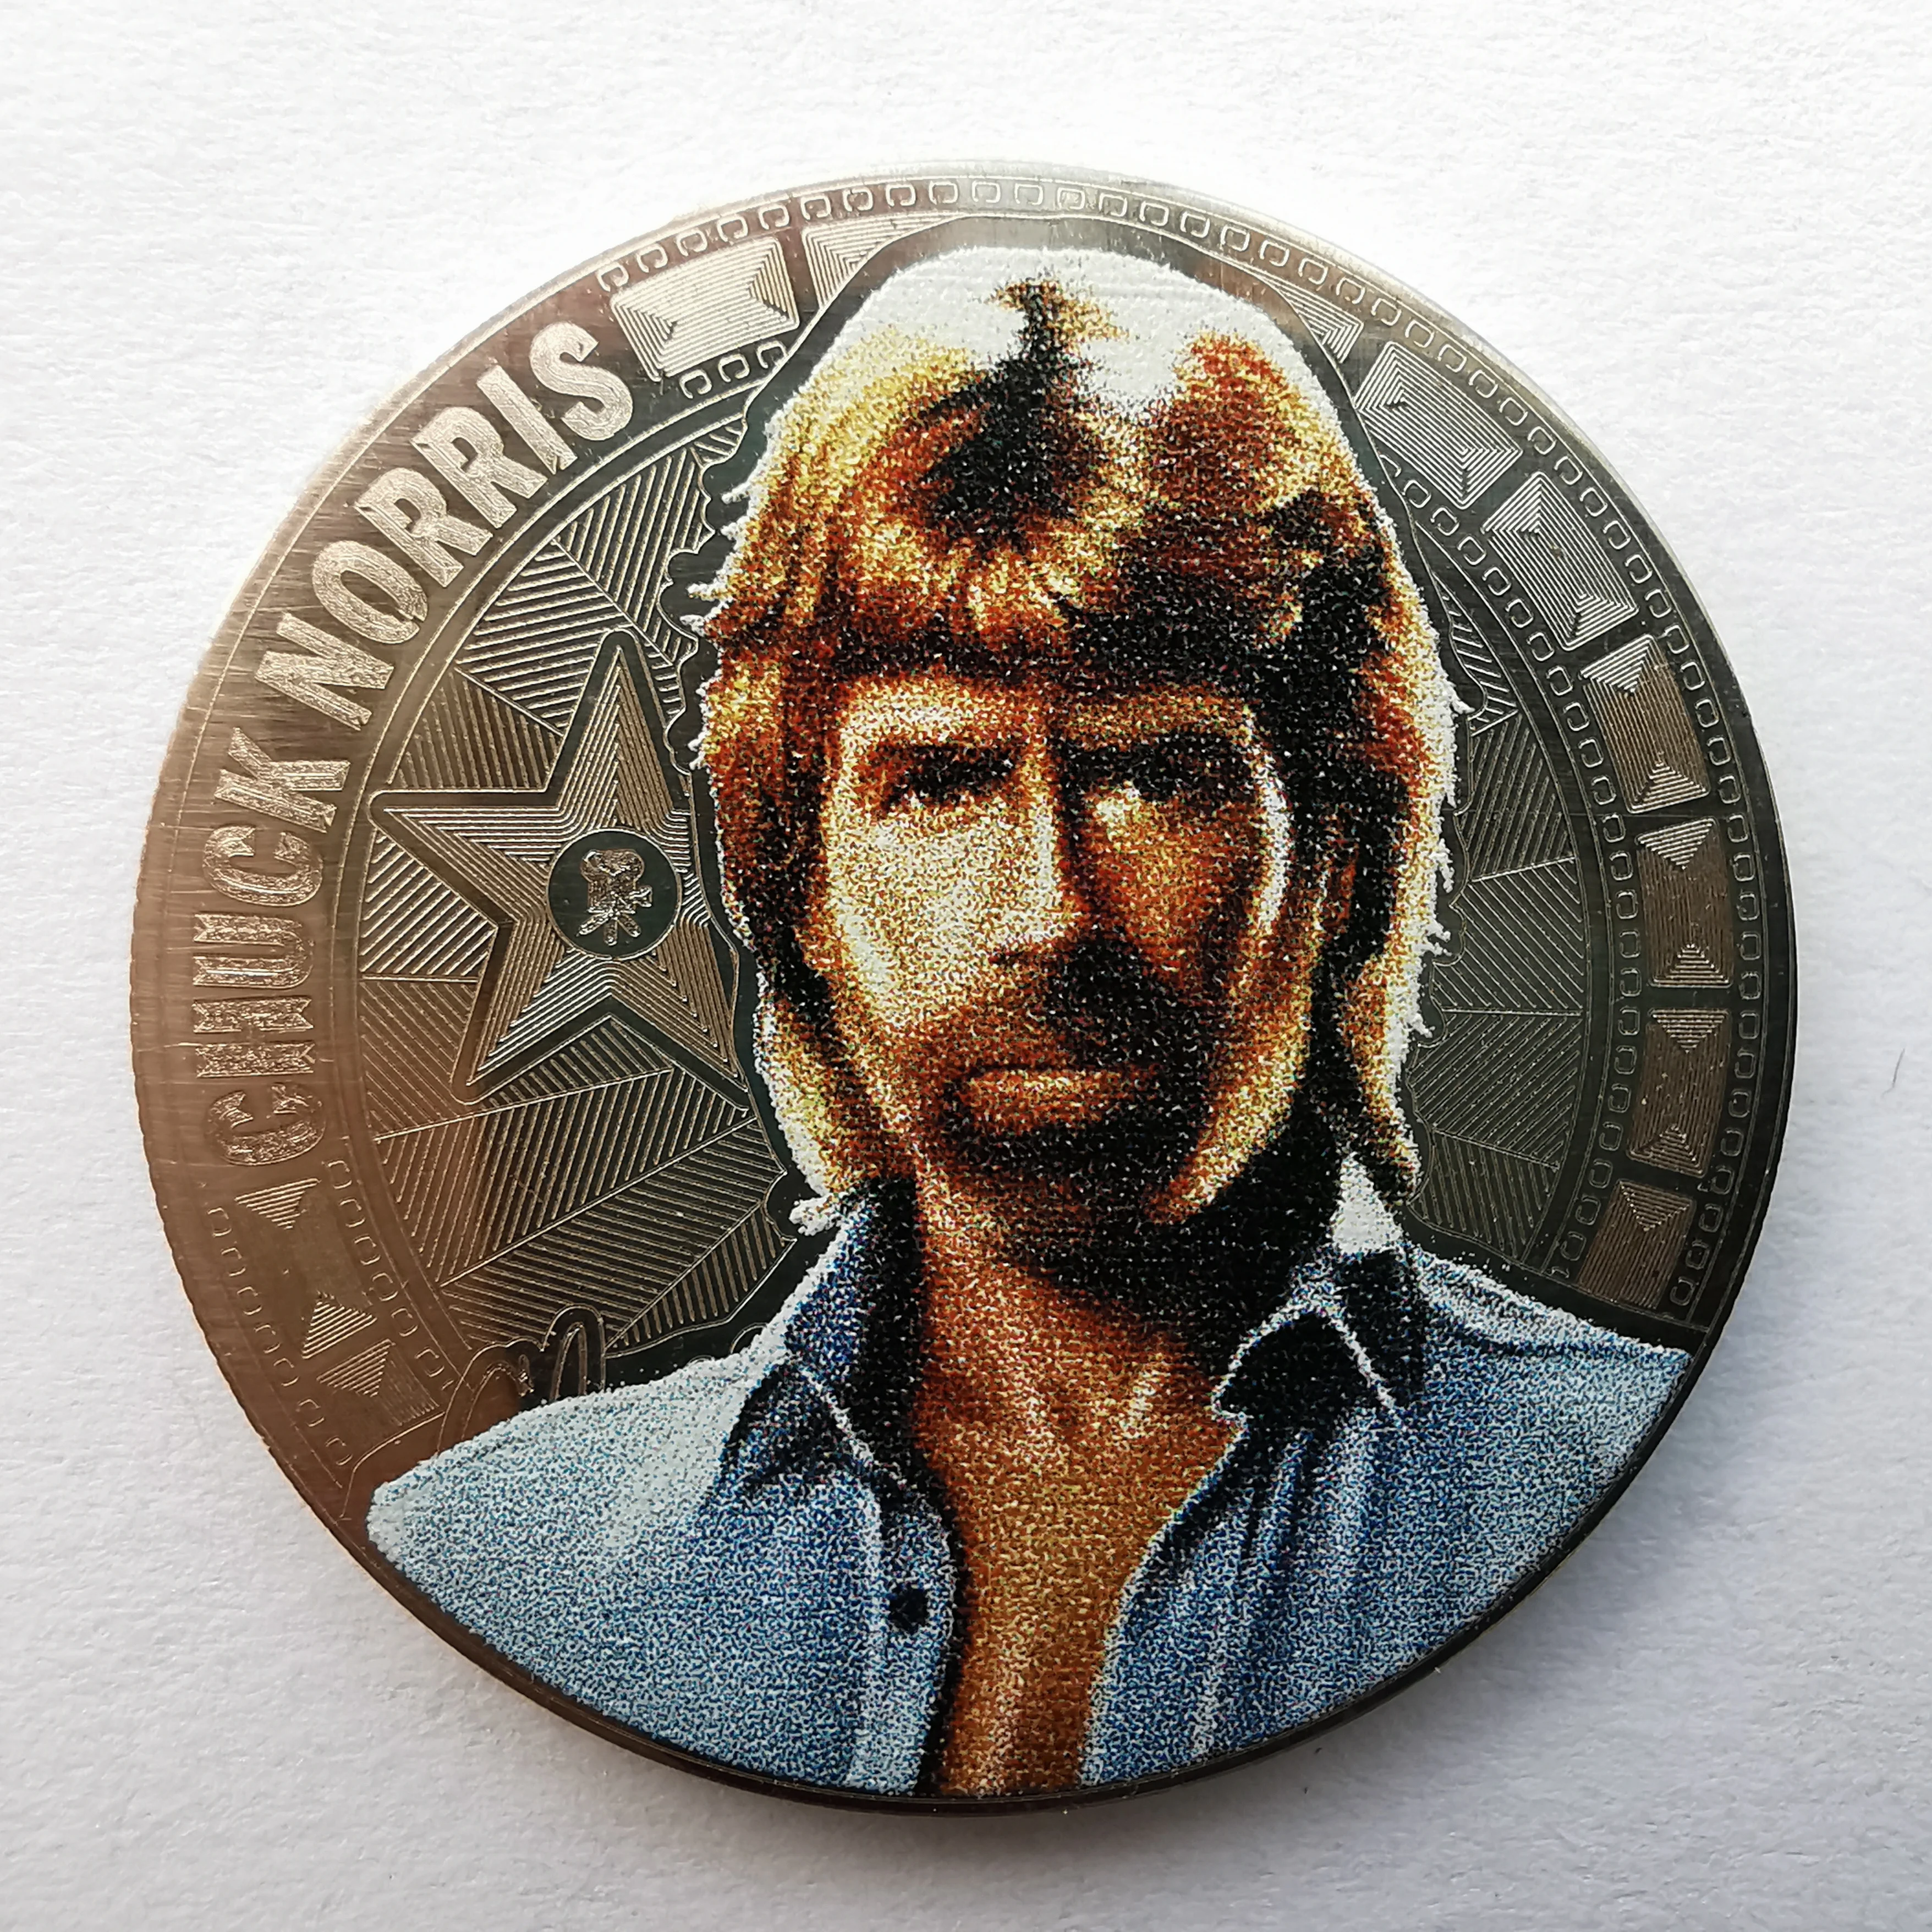 Chip wright chuck norris